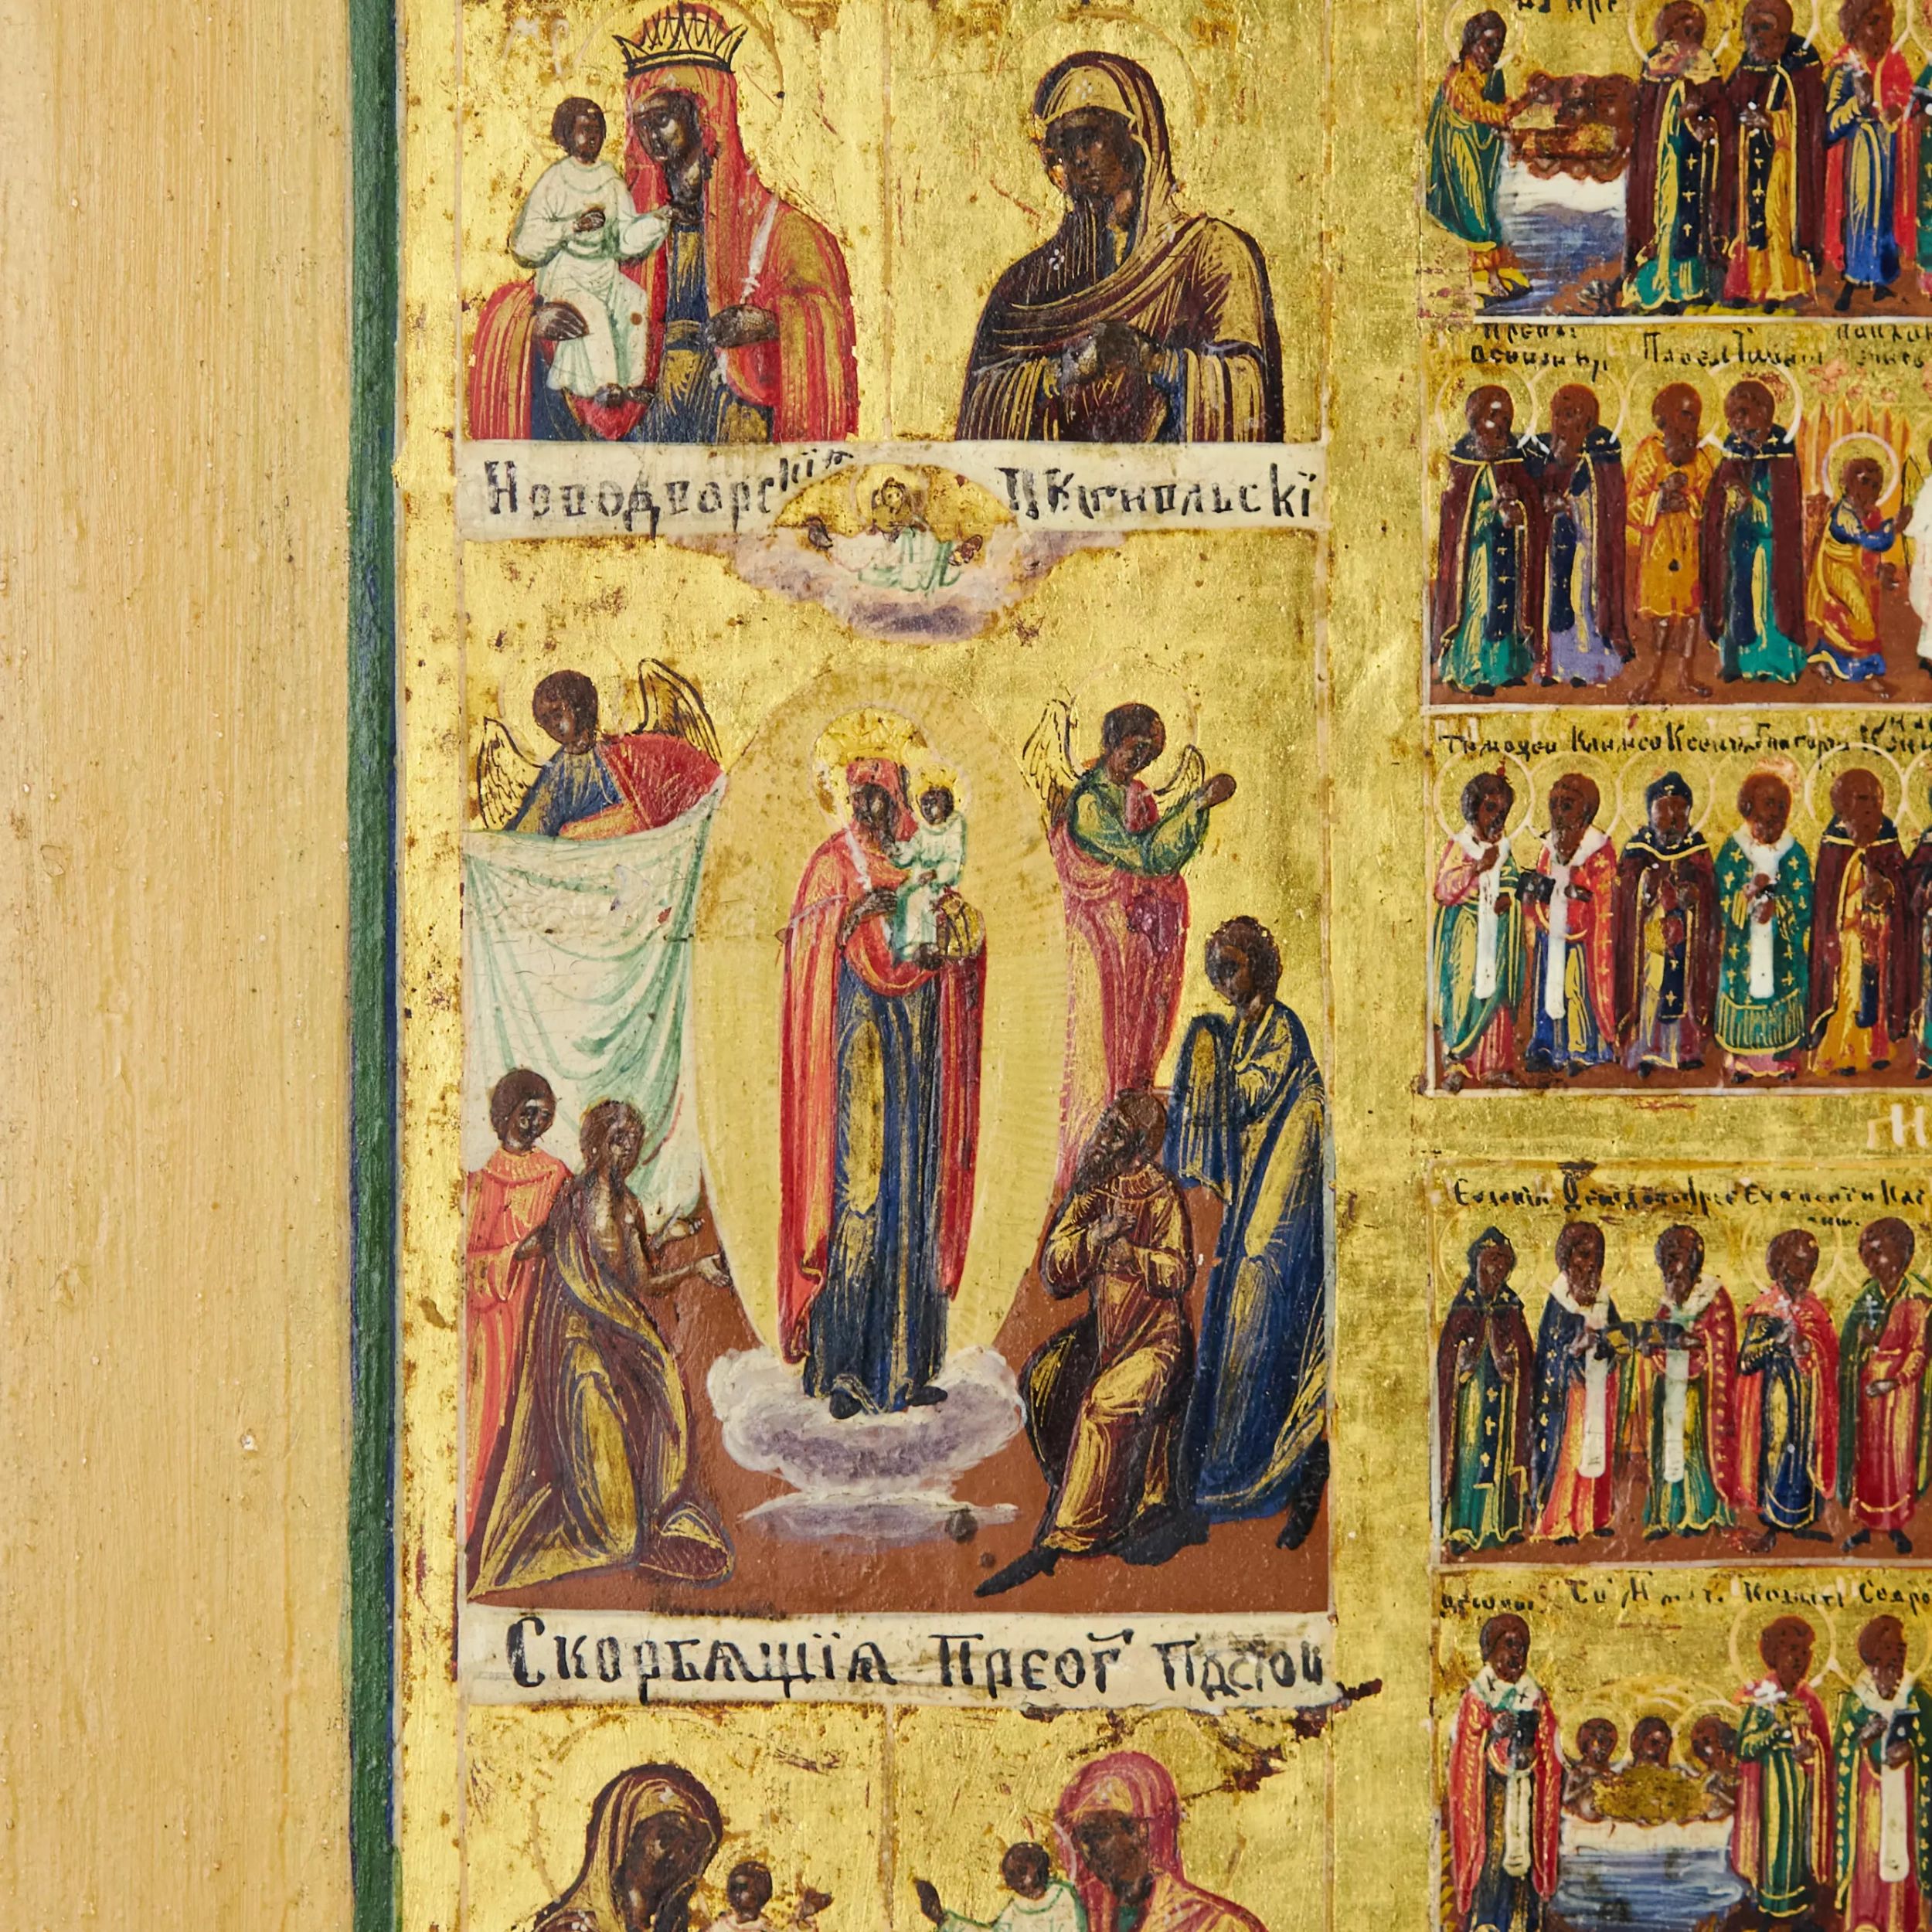 Magnificent holidays with an annual menaion and a two-row cycle of Theotokos icons. 19th century. - Image 7 of 11